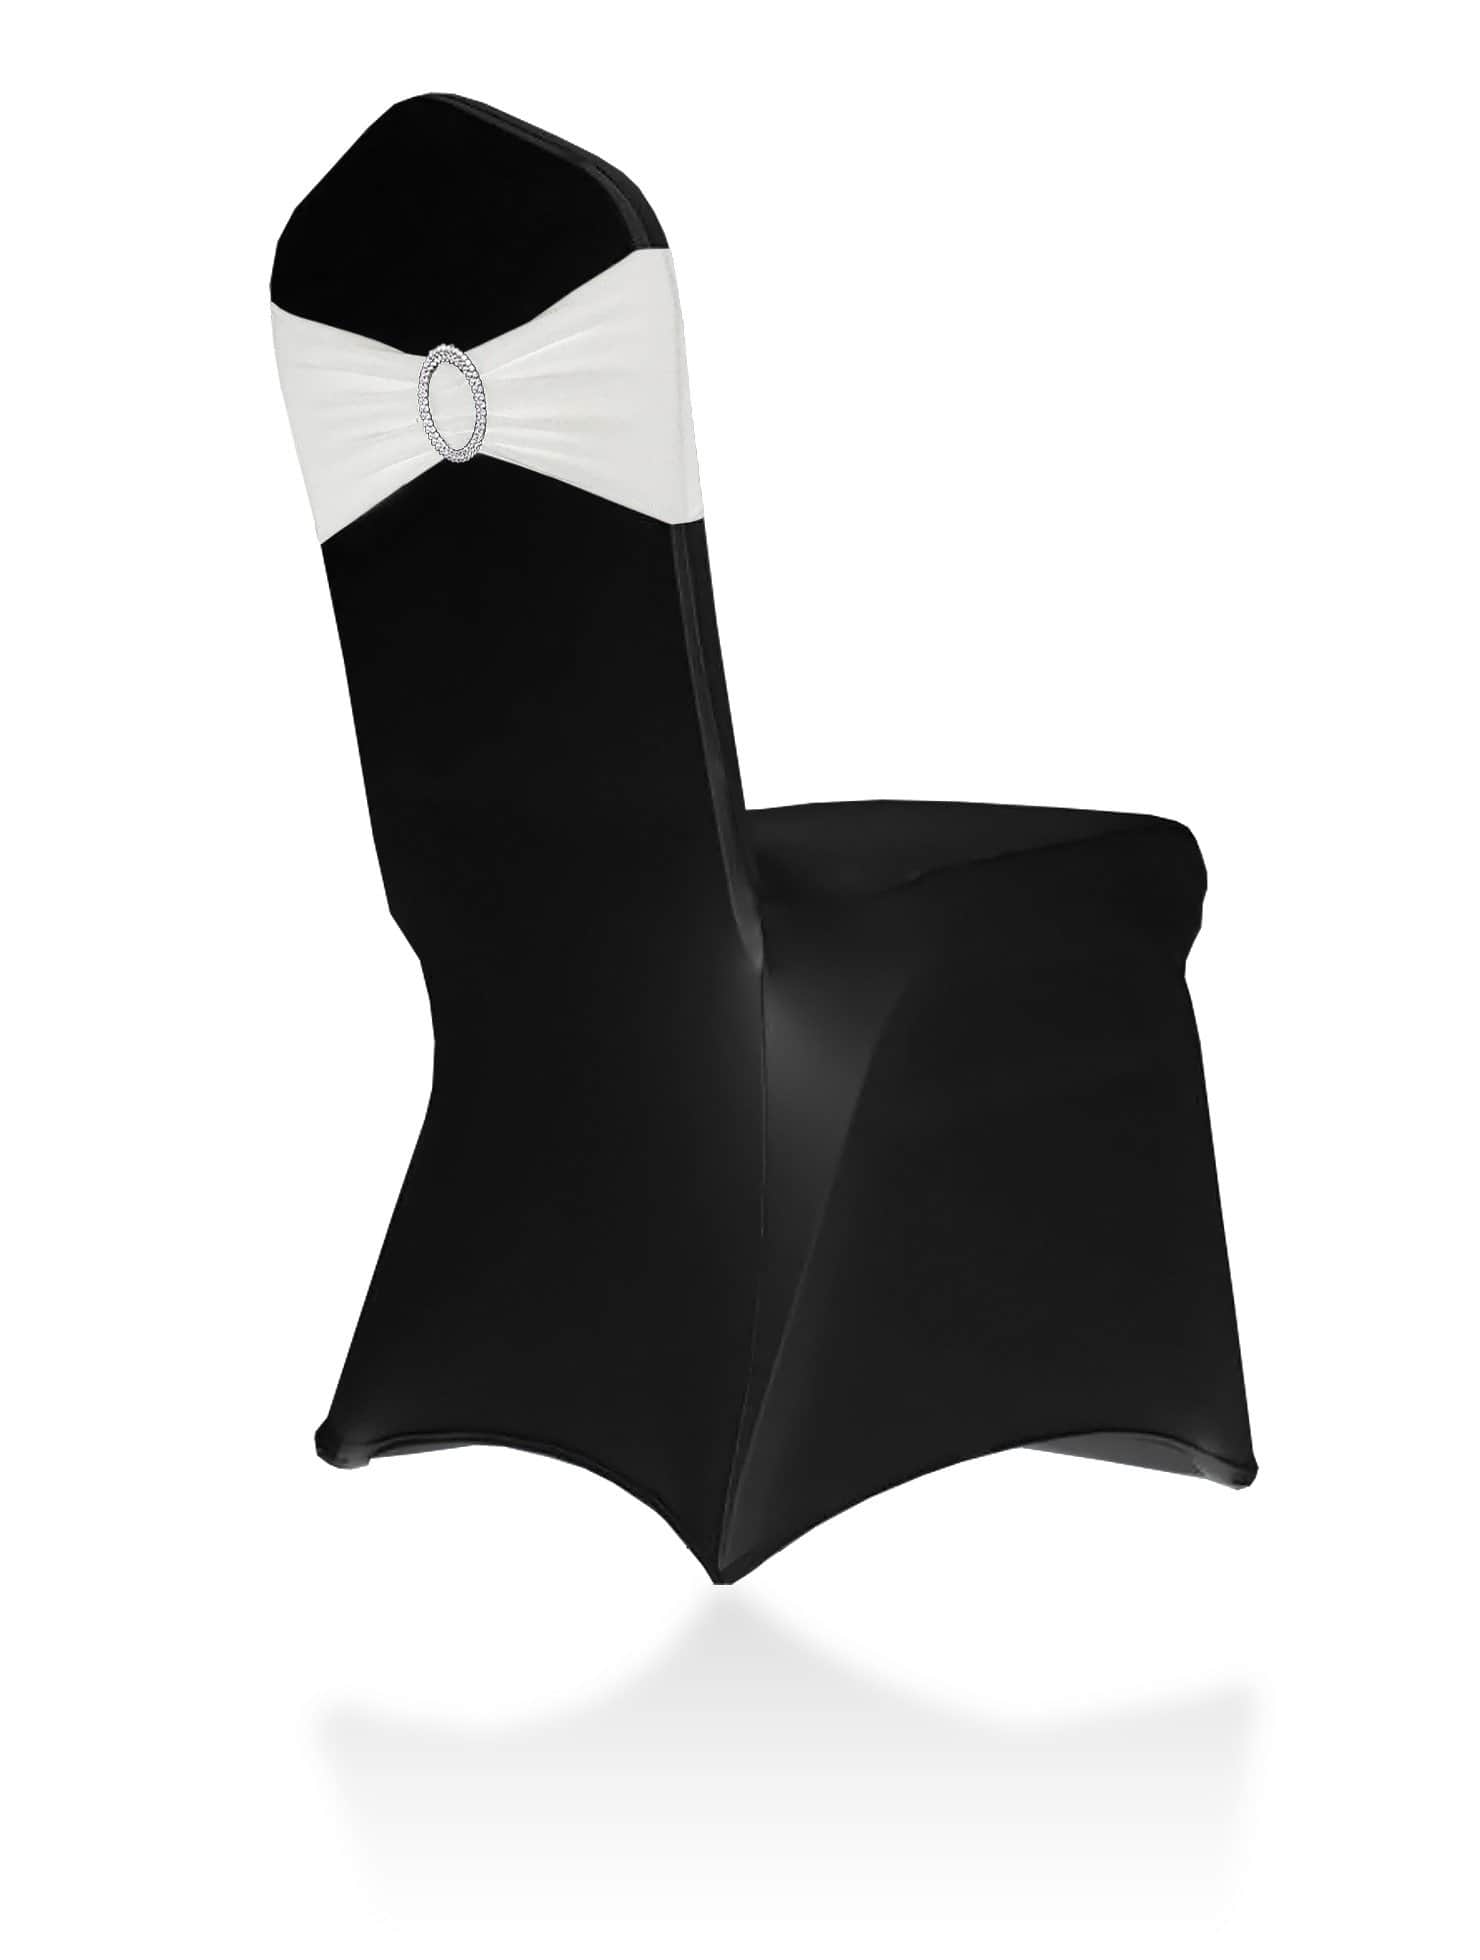 Rent elastic black chair covers for folding chairs. Ships Nationwide!